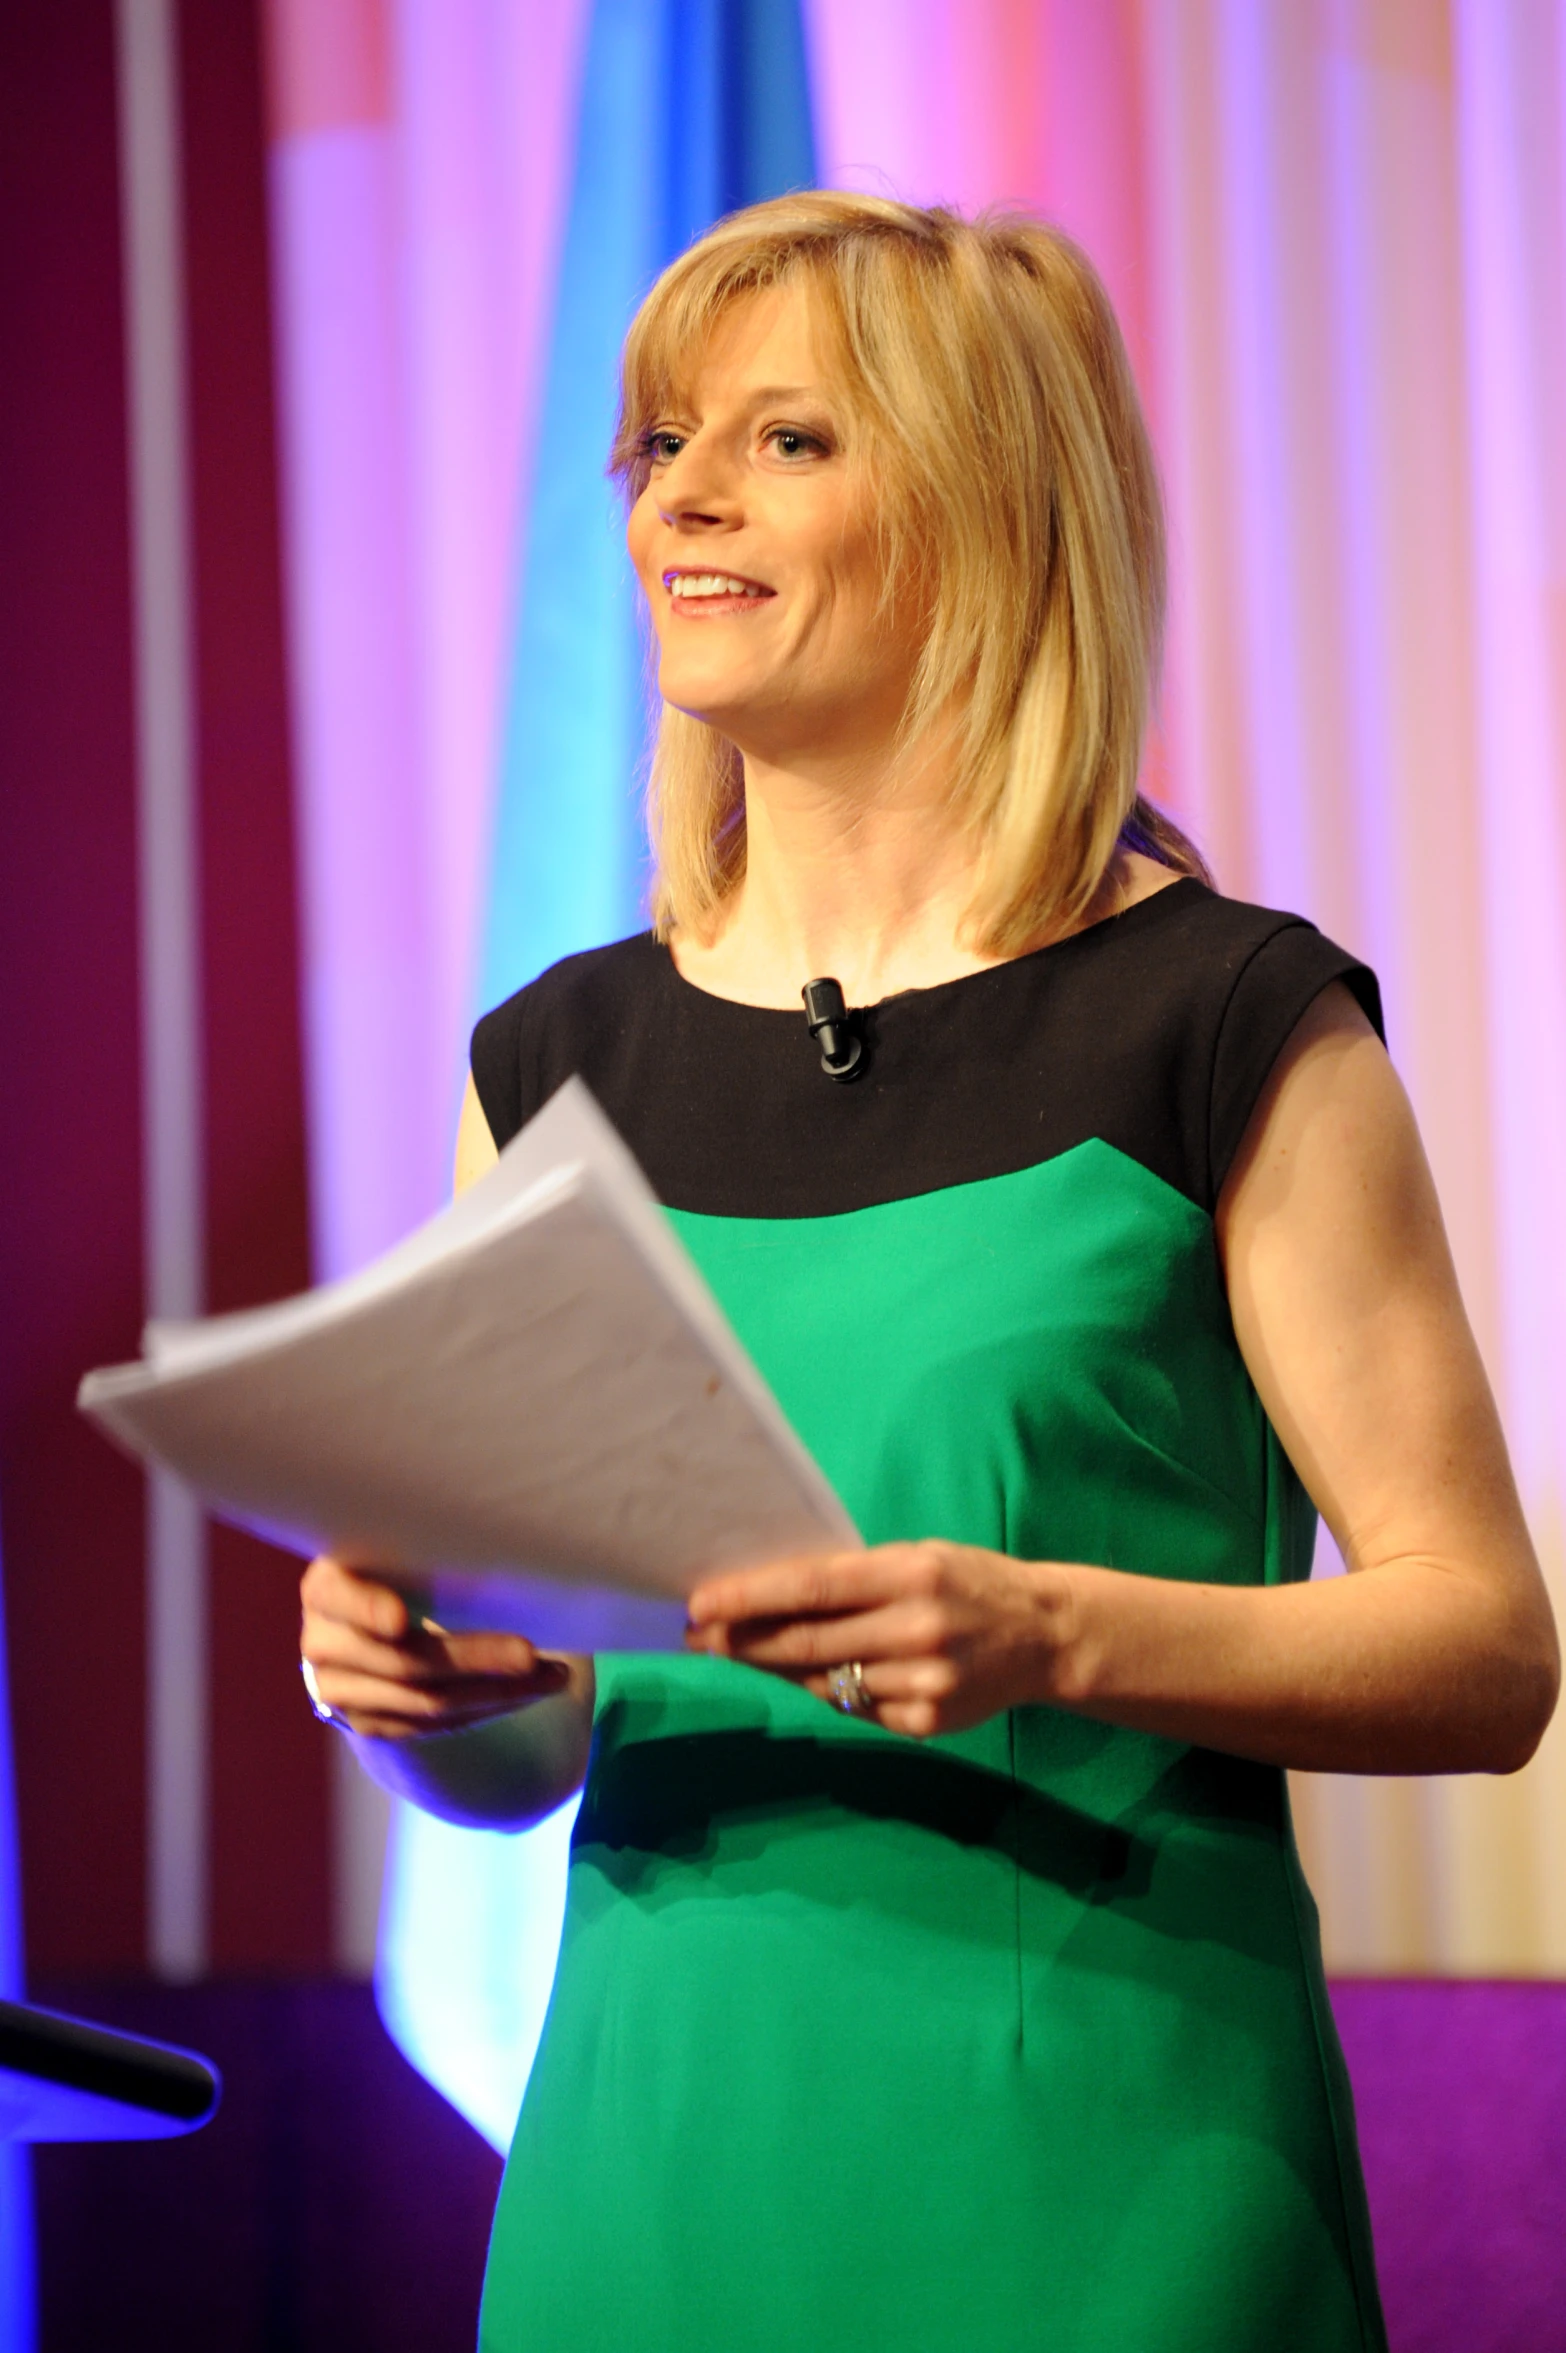 a woman stands and speaks at an event